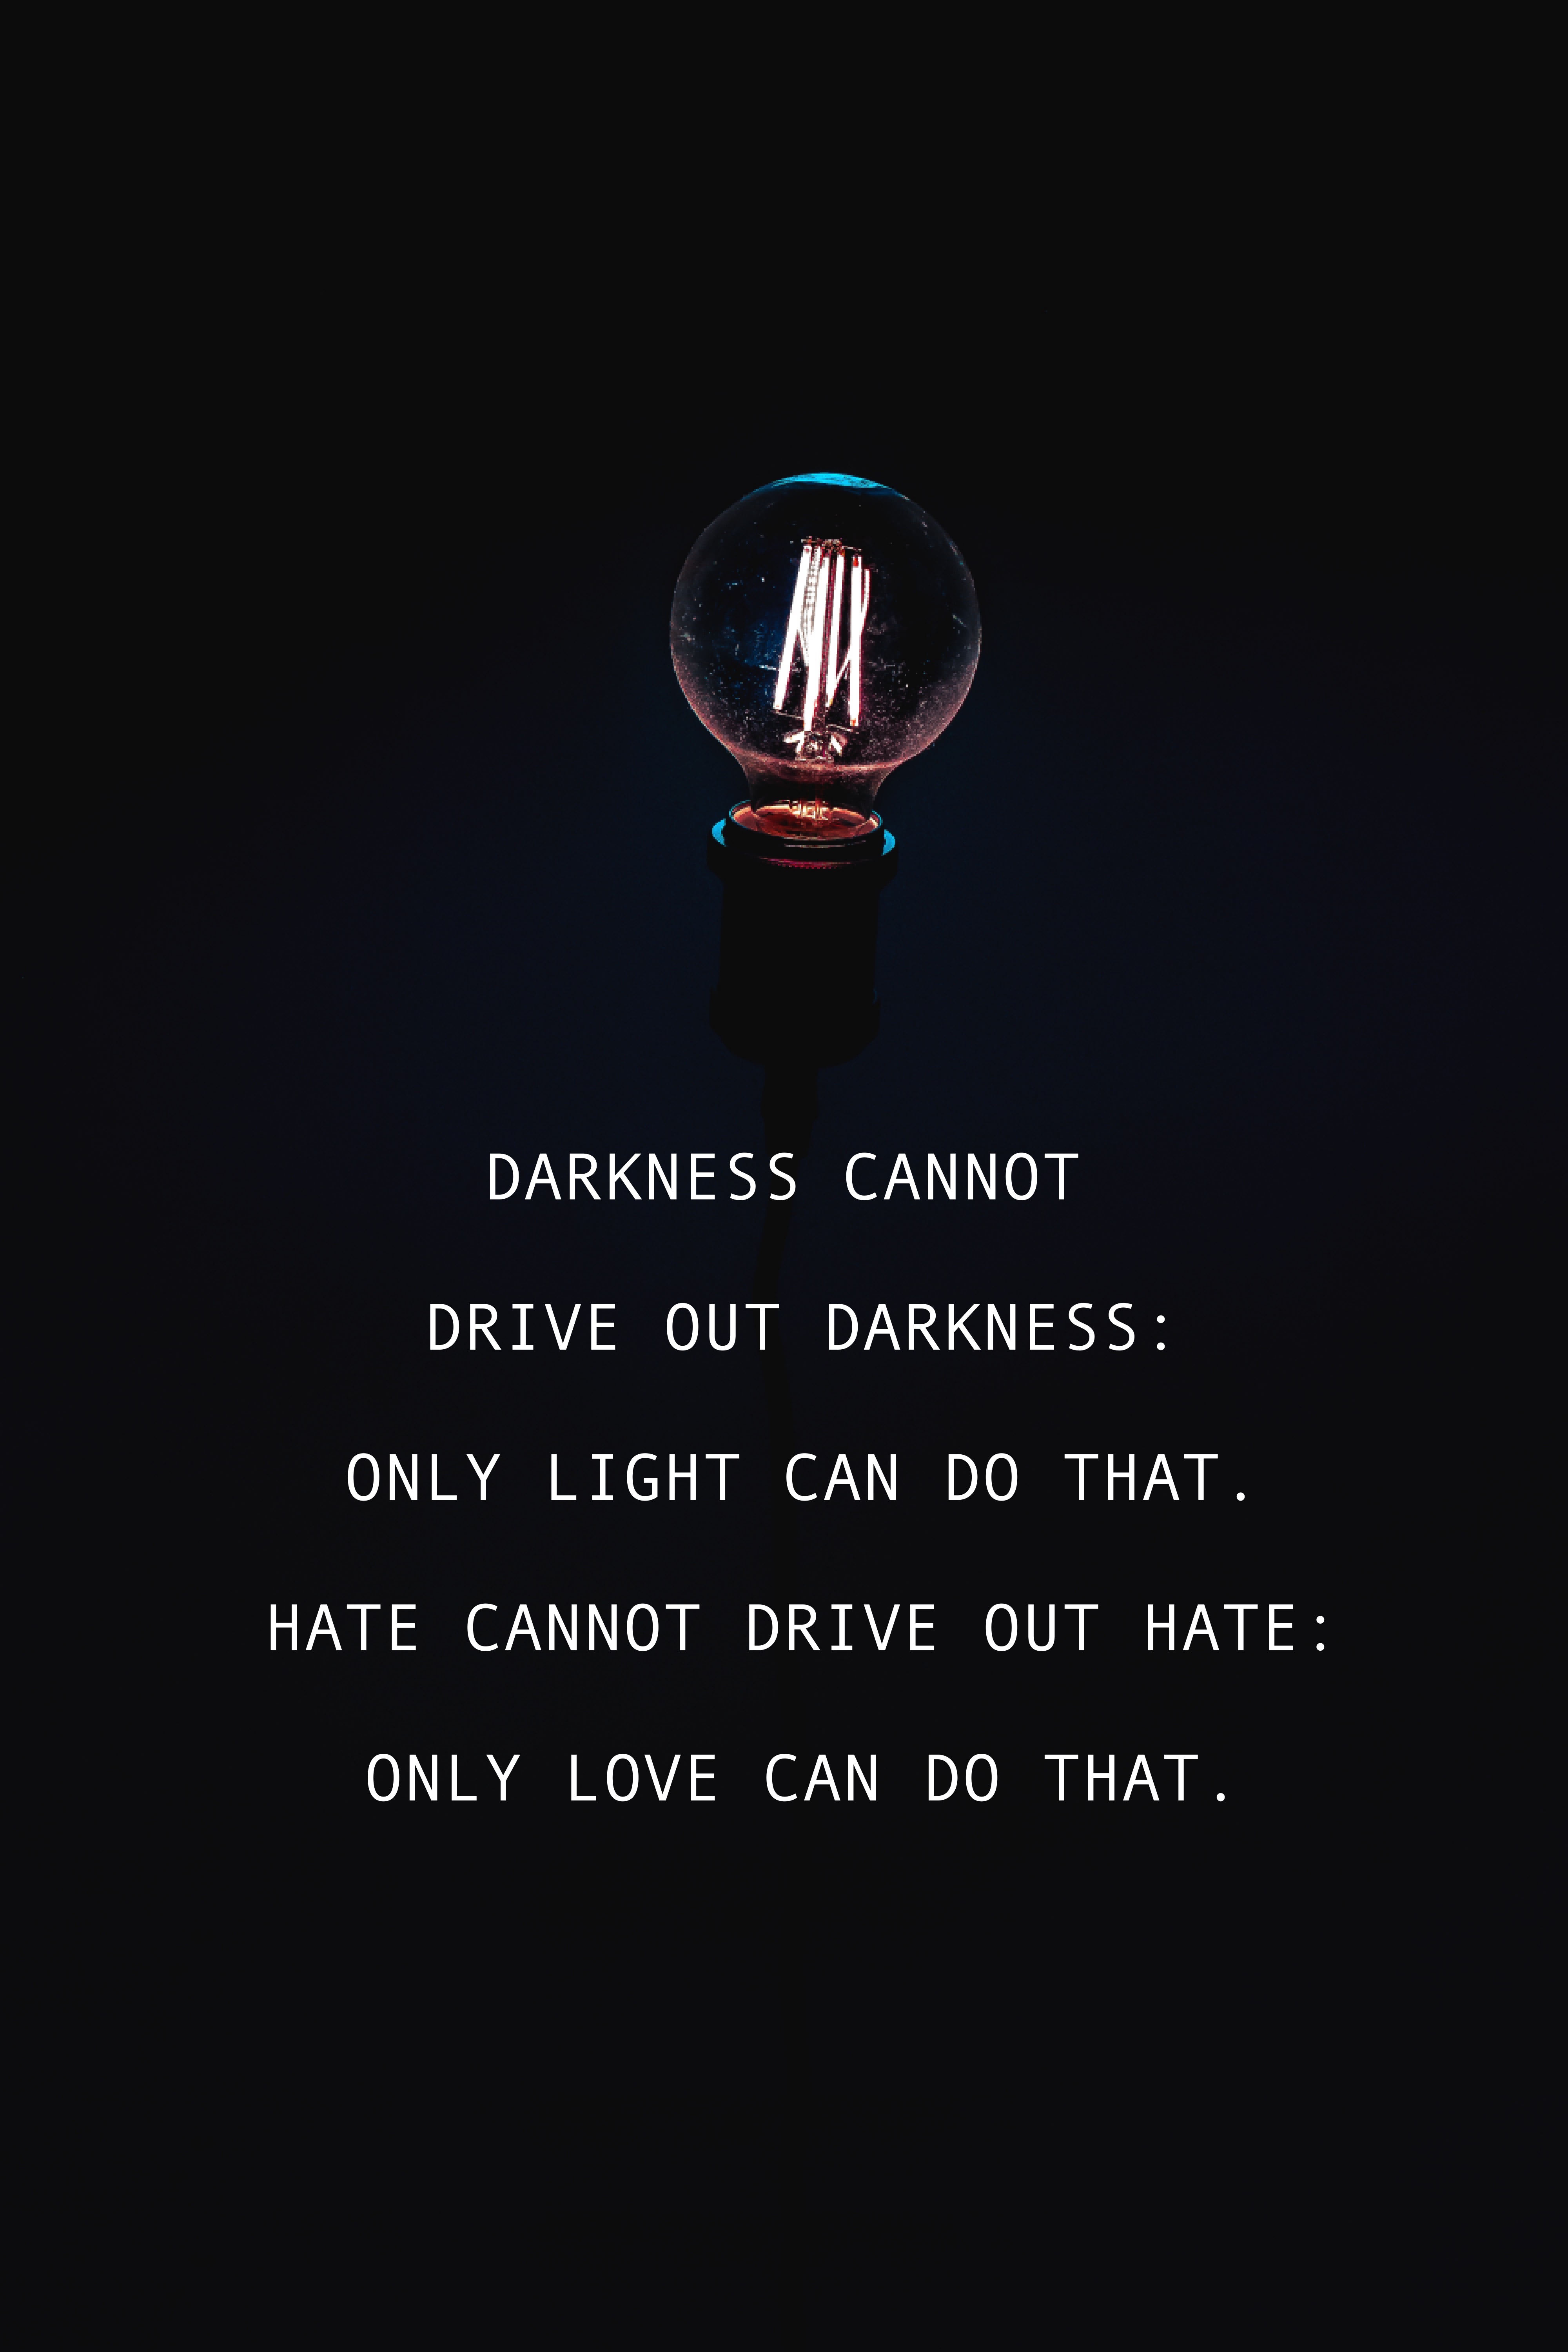 141797 download wallpaper darkness, love, words, motivation, inspiration screensavers and pictures for free